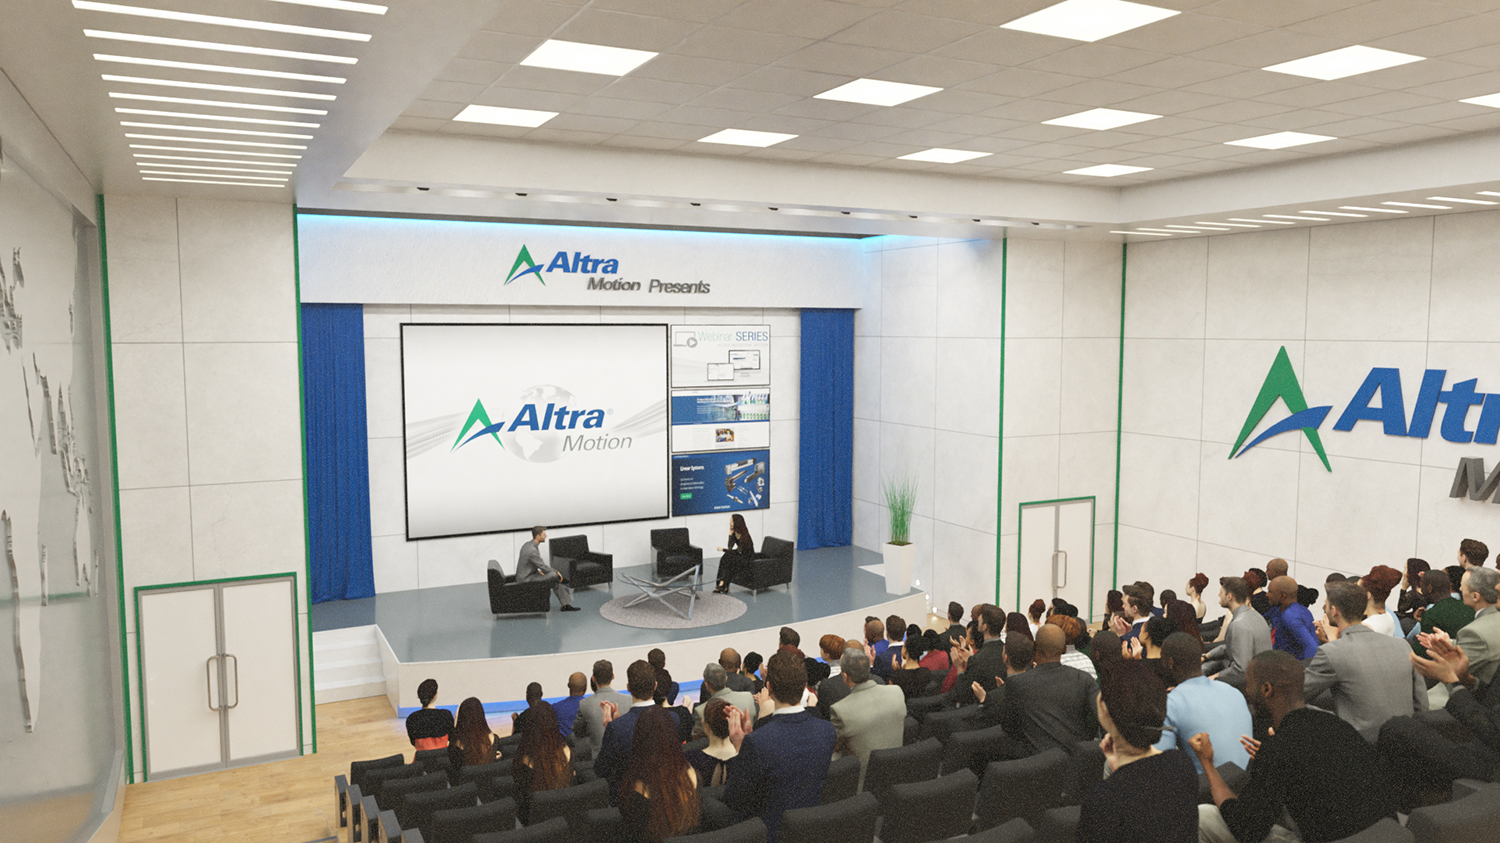 Altra Industrial Motion Corp. has expanded its virtual exhibition with new explorable 3D application environments, booths, event areas and products.